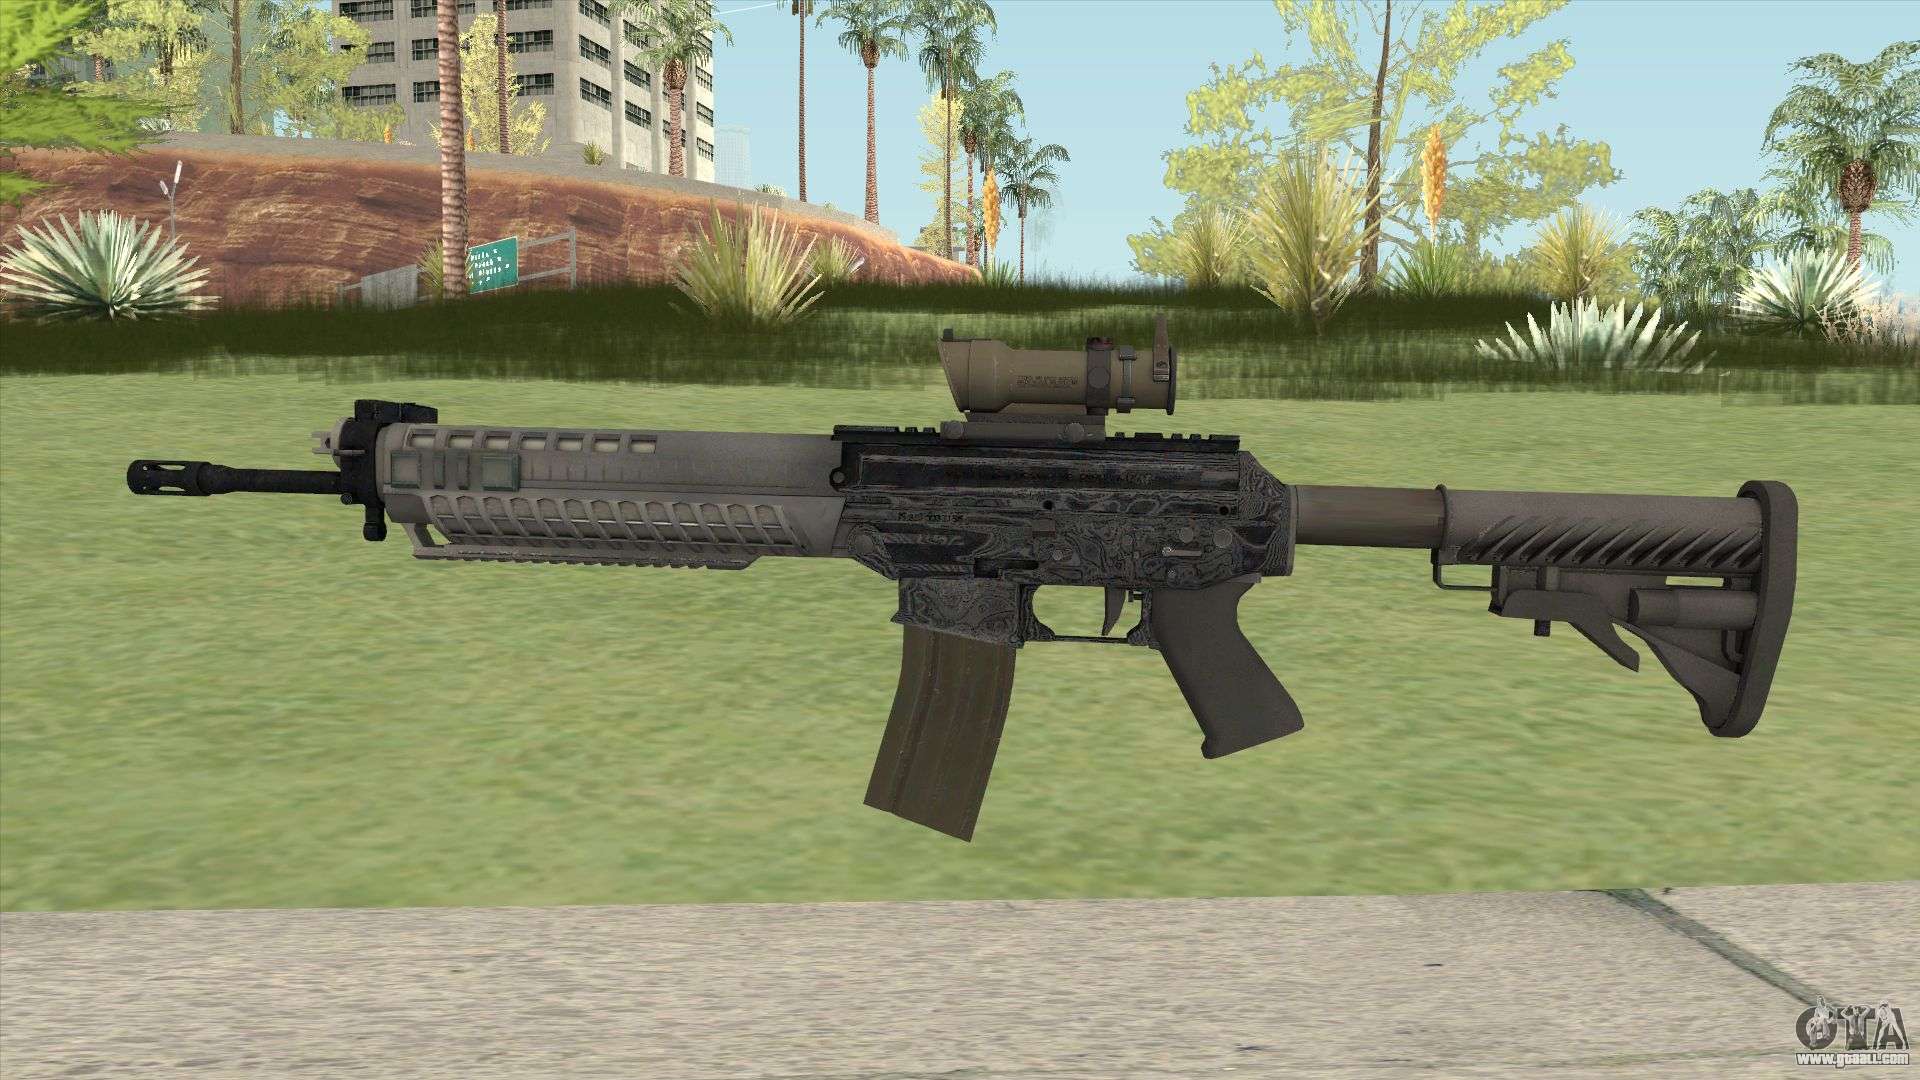 SG 553 Aerial cs go skin for android download